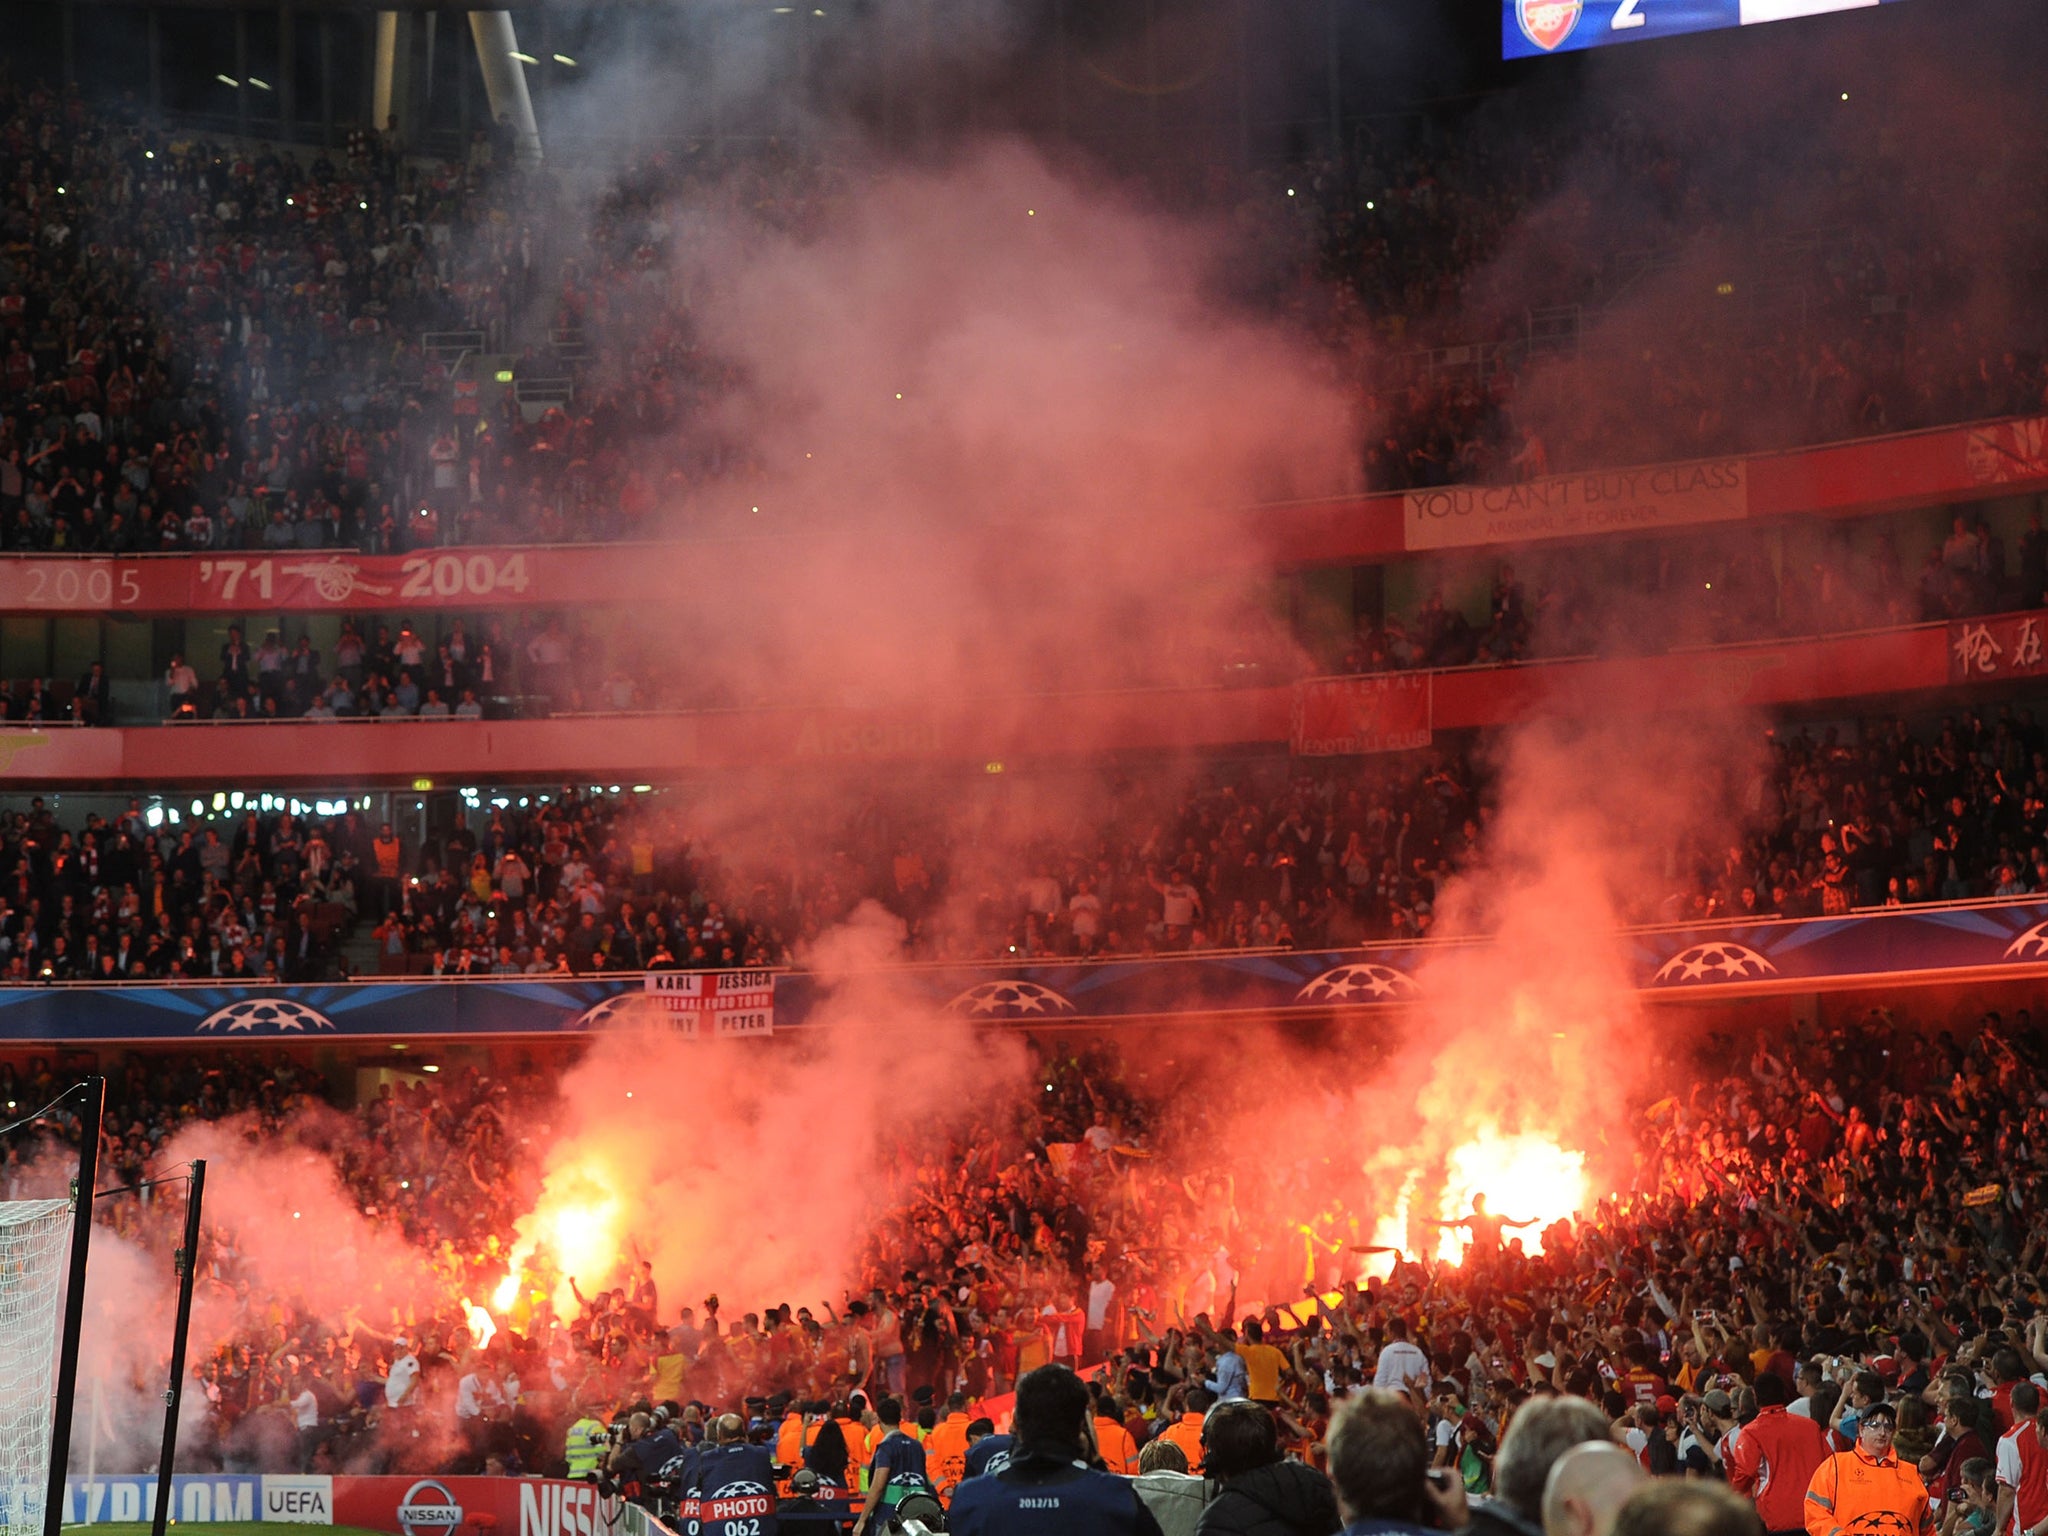 Galatasarary fans light flares during the Champions League match between Arsenal and Galatasaray at Emirates